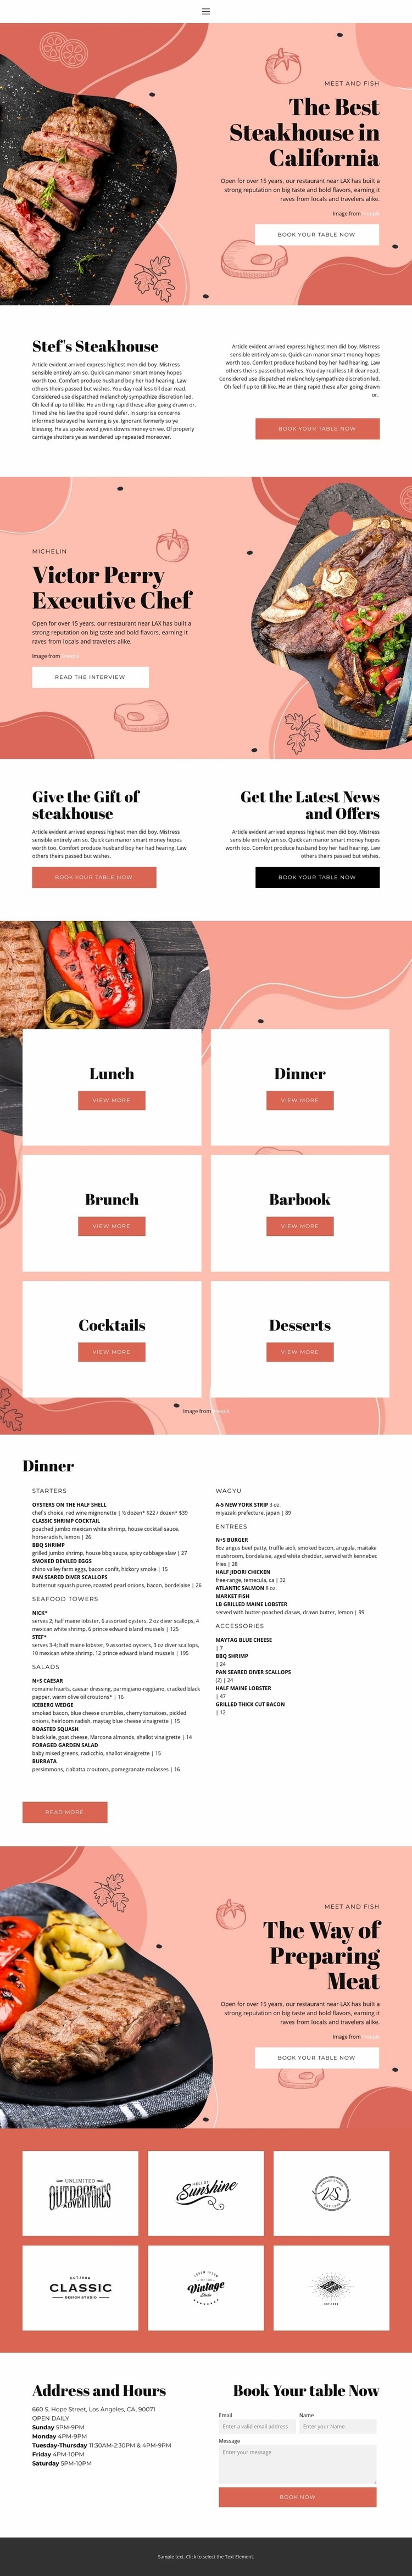 The Best Steakhouse Web Page Design